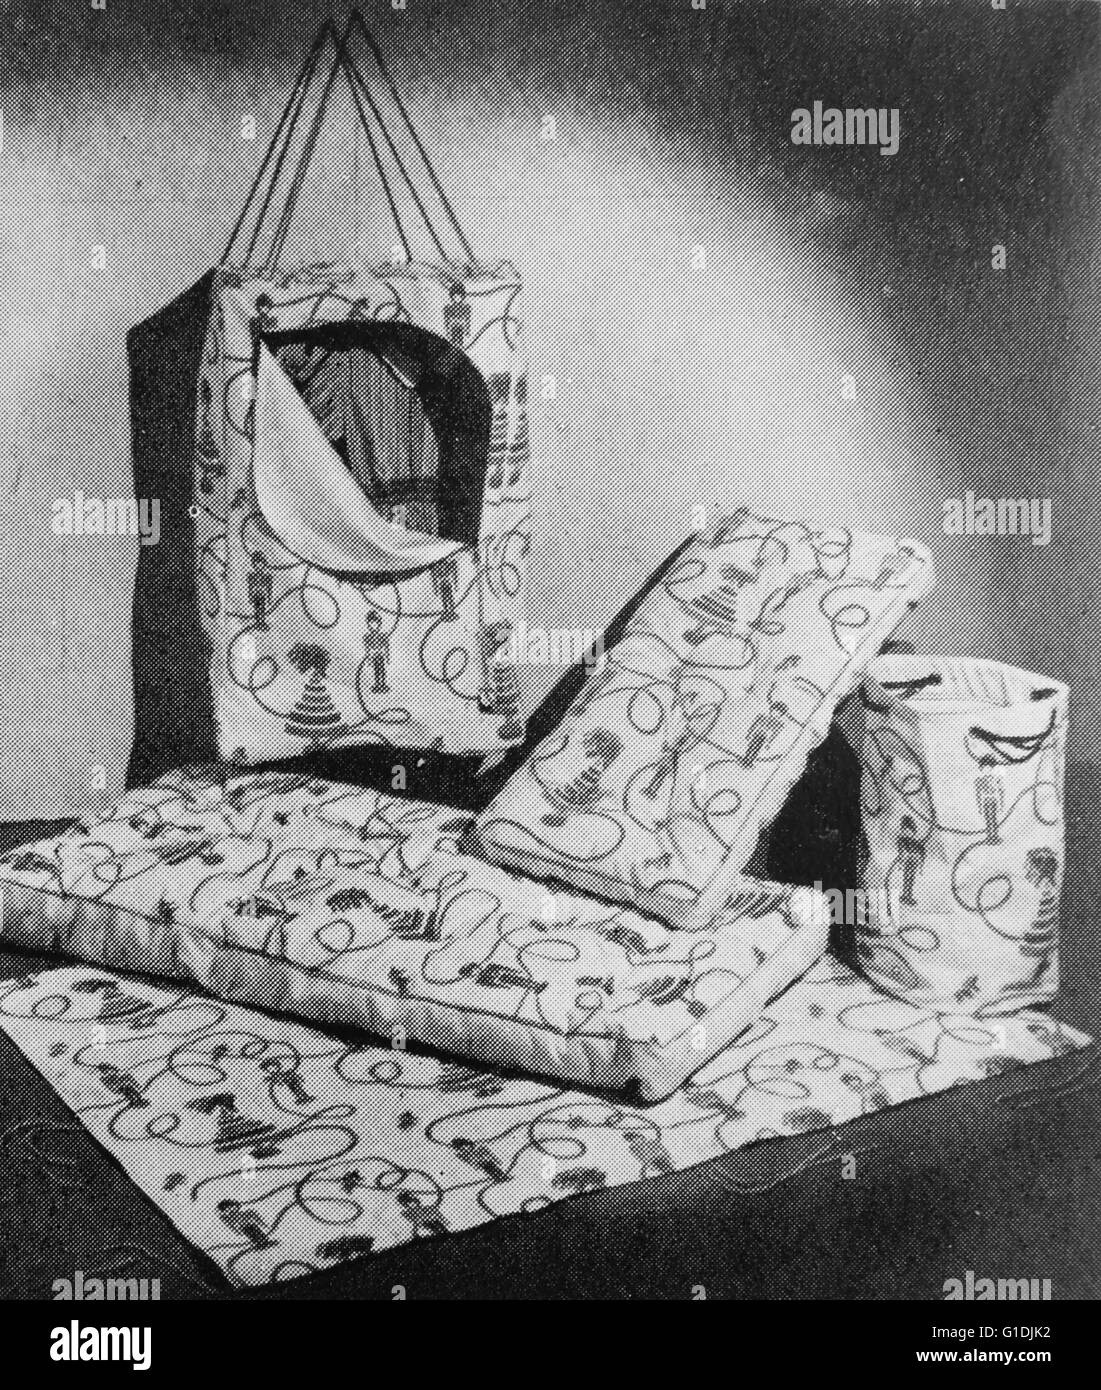 A hanging wardrobe, toy bag and mattress ideal for the small home. All made from patterned cotton. Stock Photo